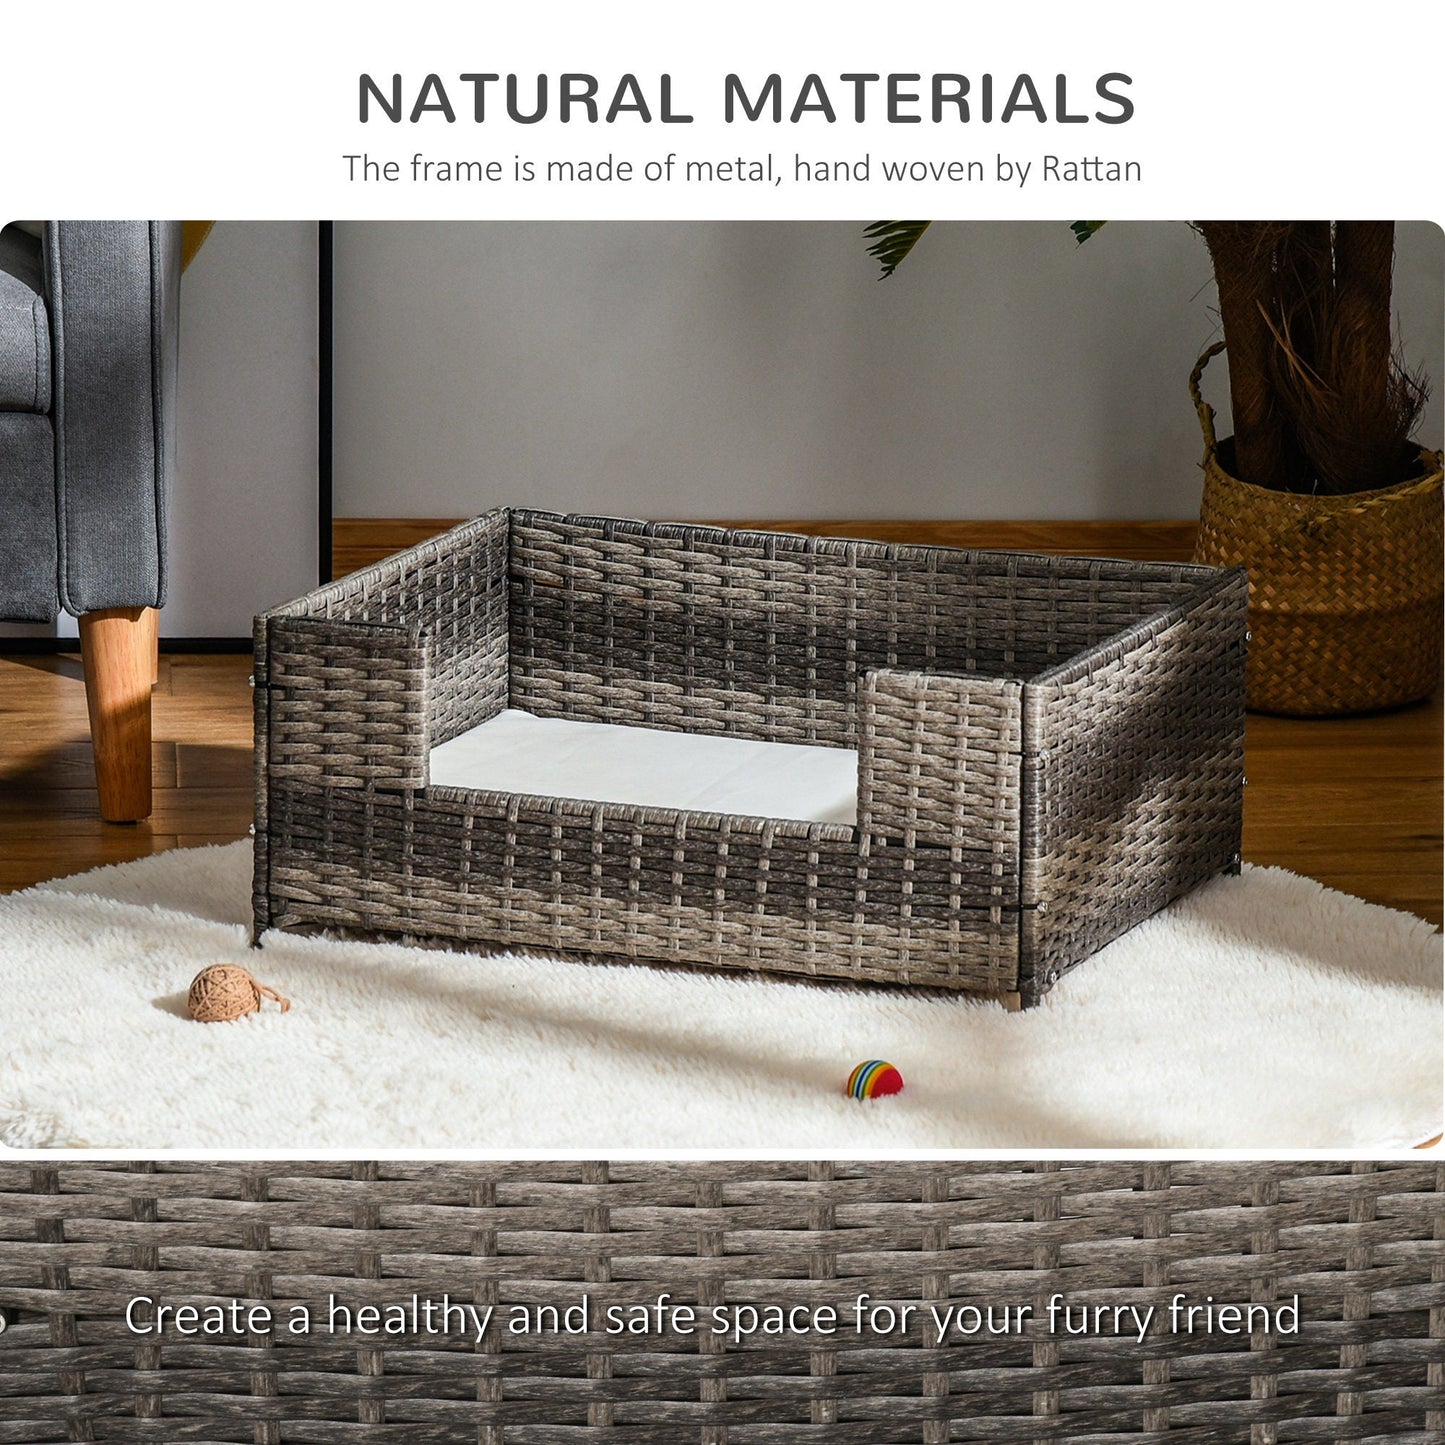 Outdoor and Garden-Rattan Pet Bed Raised Wicker Dog House Small animal Sofa Indoor & Outdoor with Soft Washable Water-resistant Cushion Grey - Outdoor Style Company